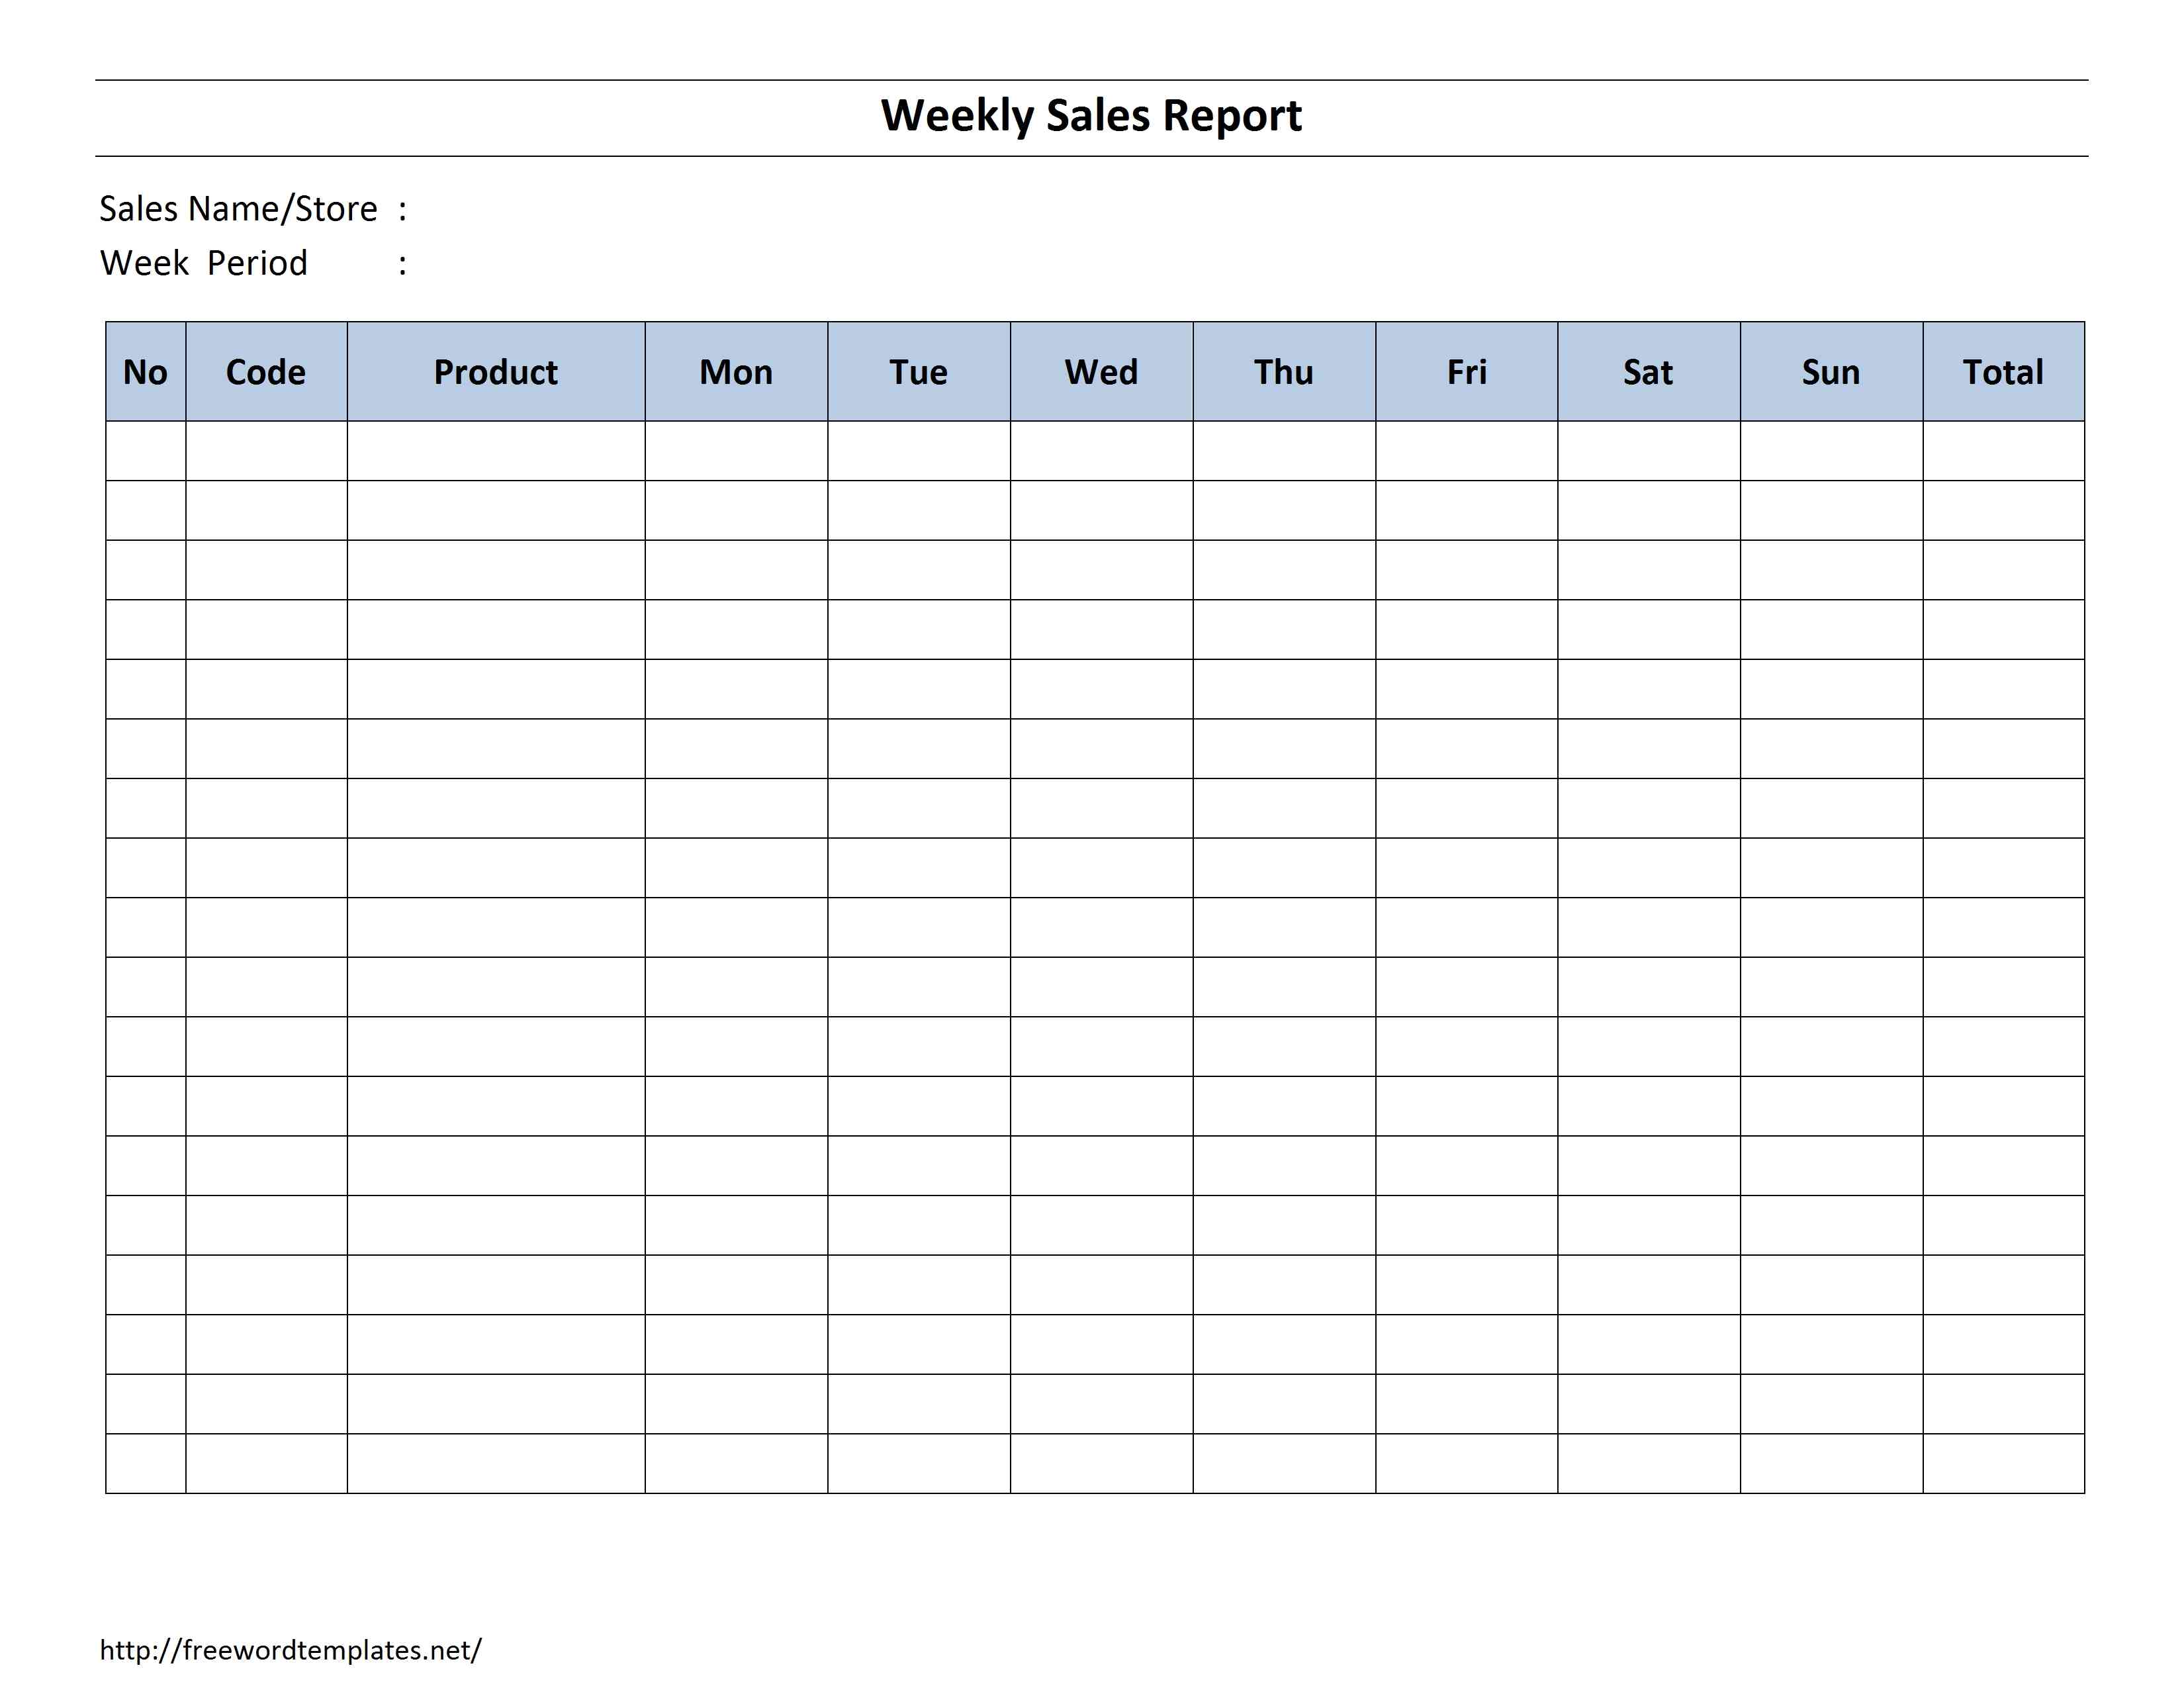 Letters Of Daily Sales Report Template Excel In Daily Sales Report Template Excel Form